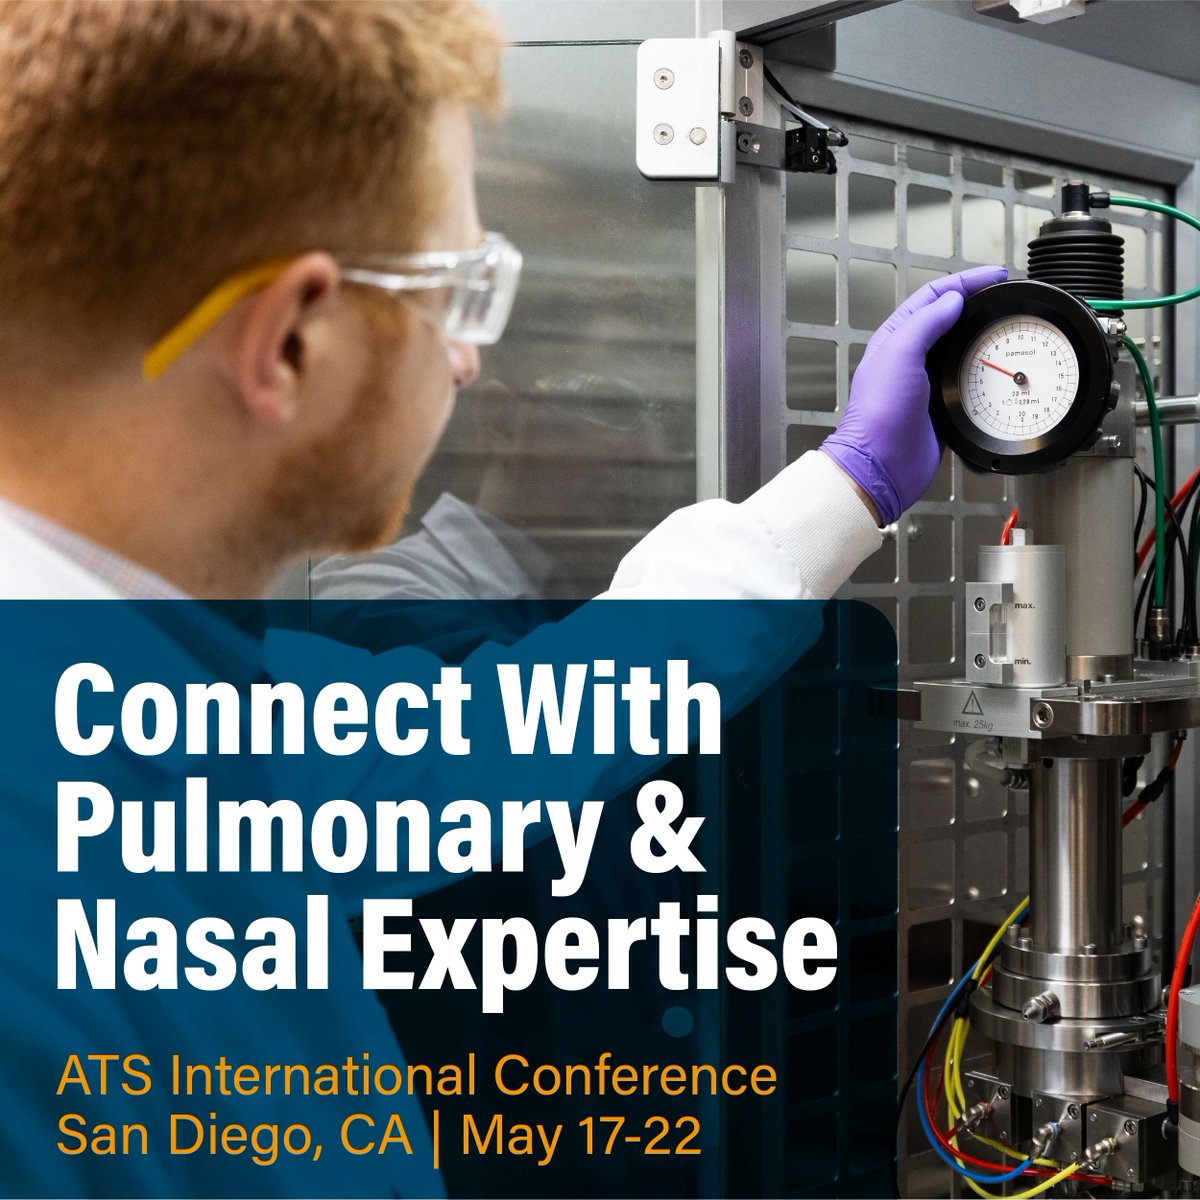 Discover our wide-ranging pulmonary & nasal expertise, from low-GWP pMDIs to inhaled #biologics, at the ATS International Conference. Be sure to schedule your meeting with our industry-leading team. ow.ly/R0Ws50RcJlq
#ATS #ATS2024 #drugdelivery